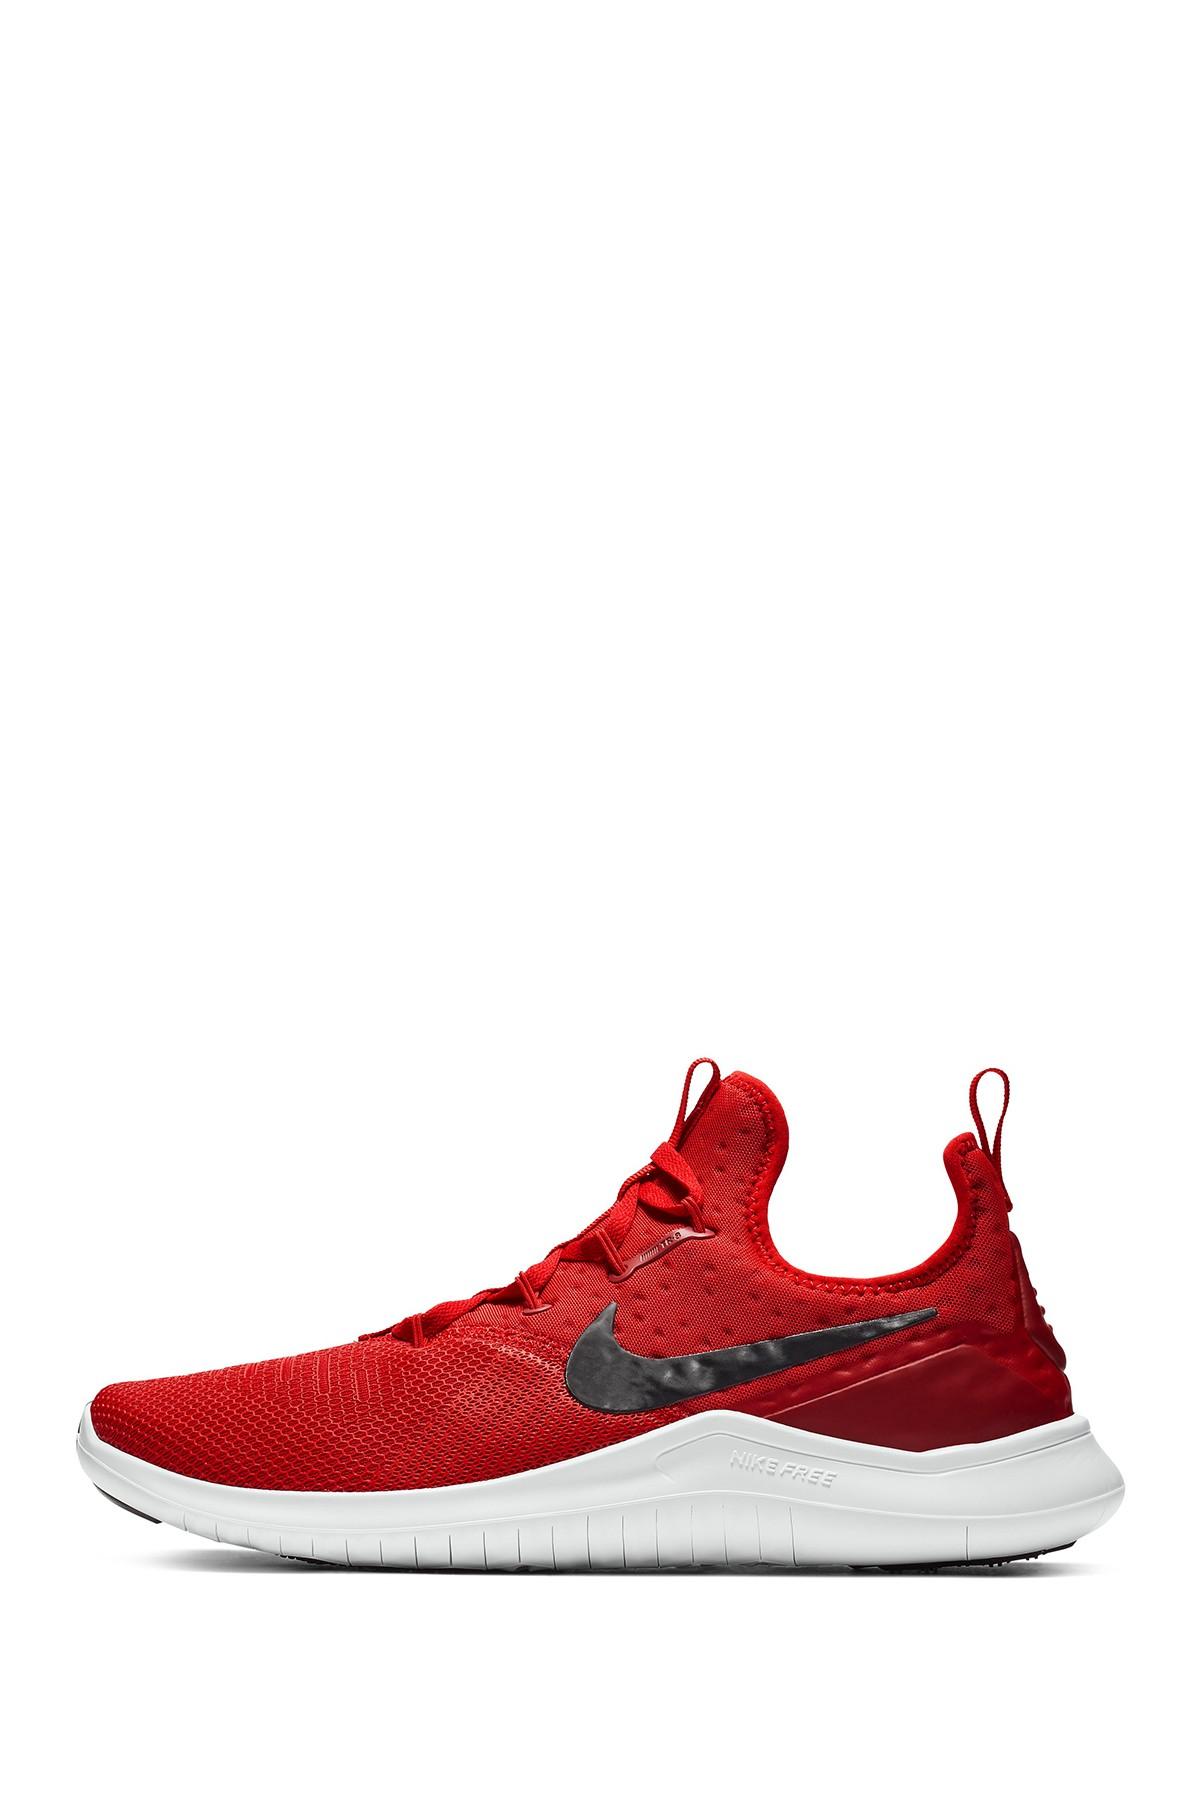 Nike Rubber Free Tr 8 Training Shoe (university Red) - Clearance Sale for  Men - Lyst